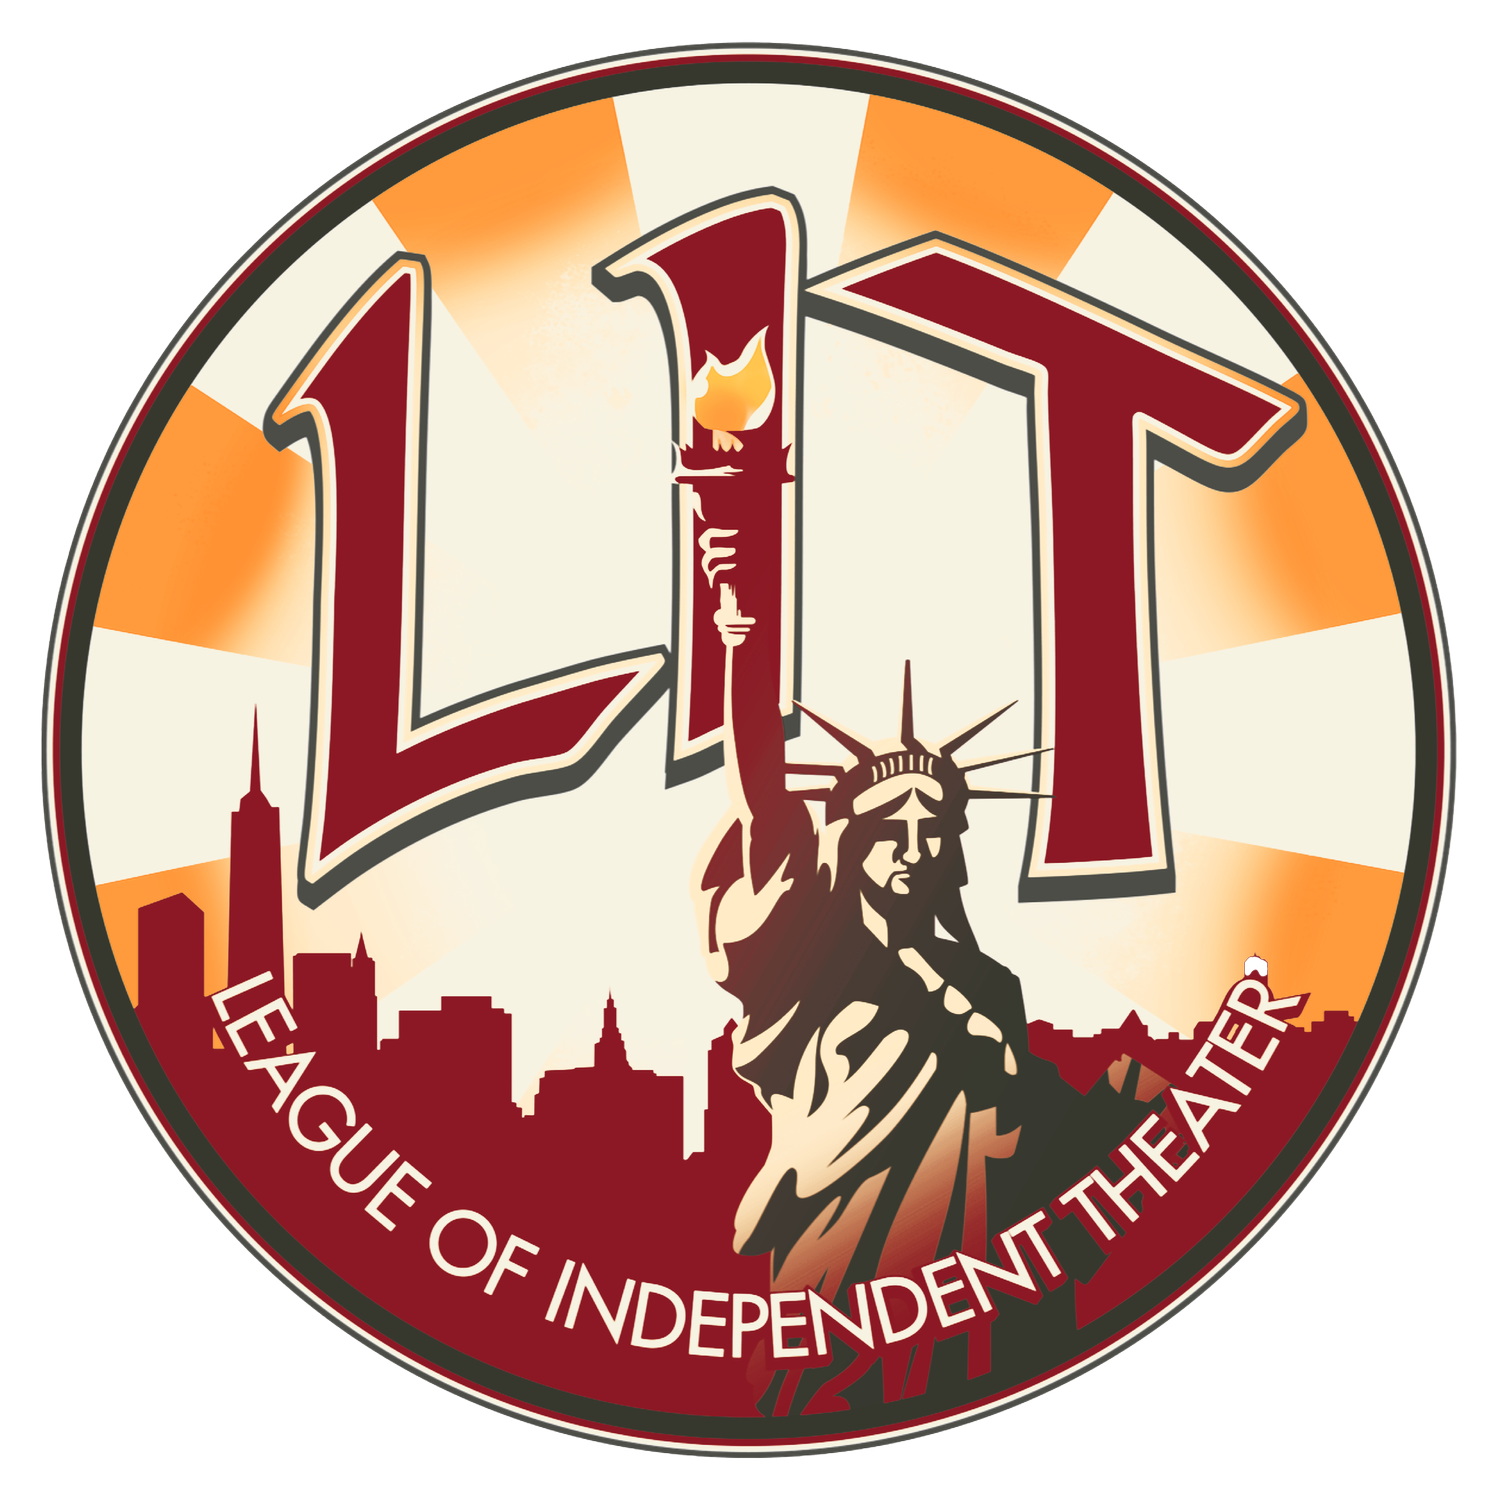 League of Independent Theater